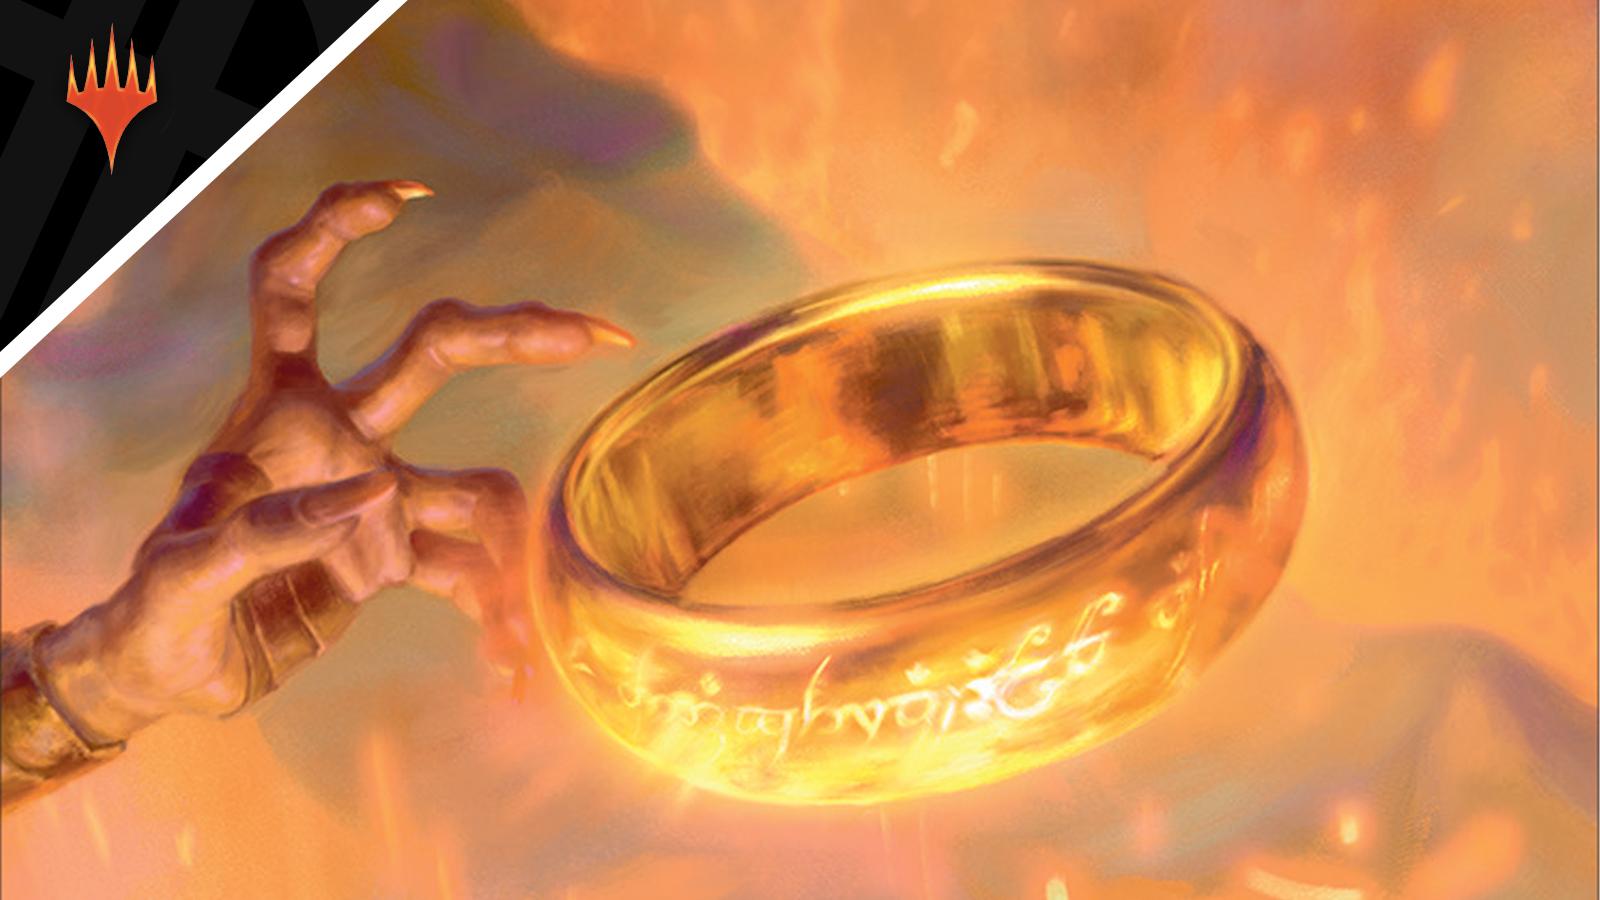 MTG collector Dan Bock issues $100K bounty on LOTR One Ring card - Dexerto